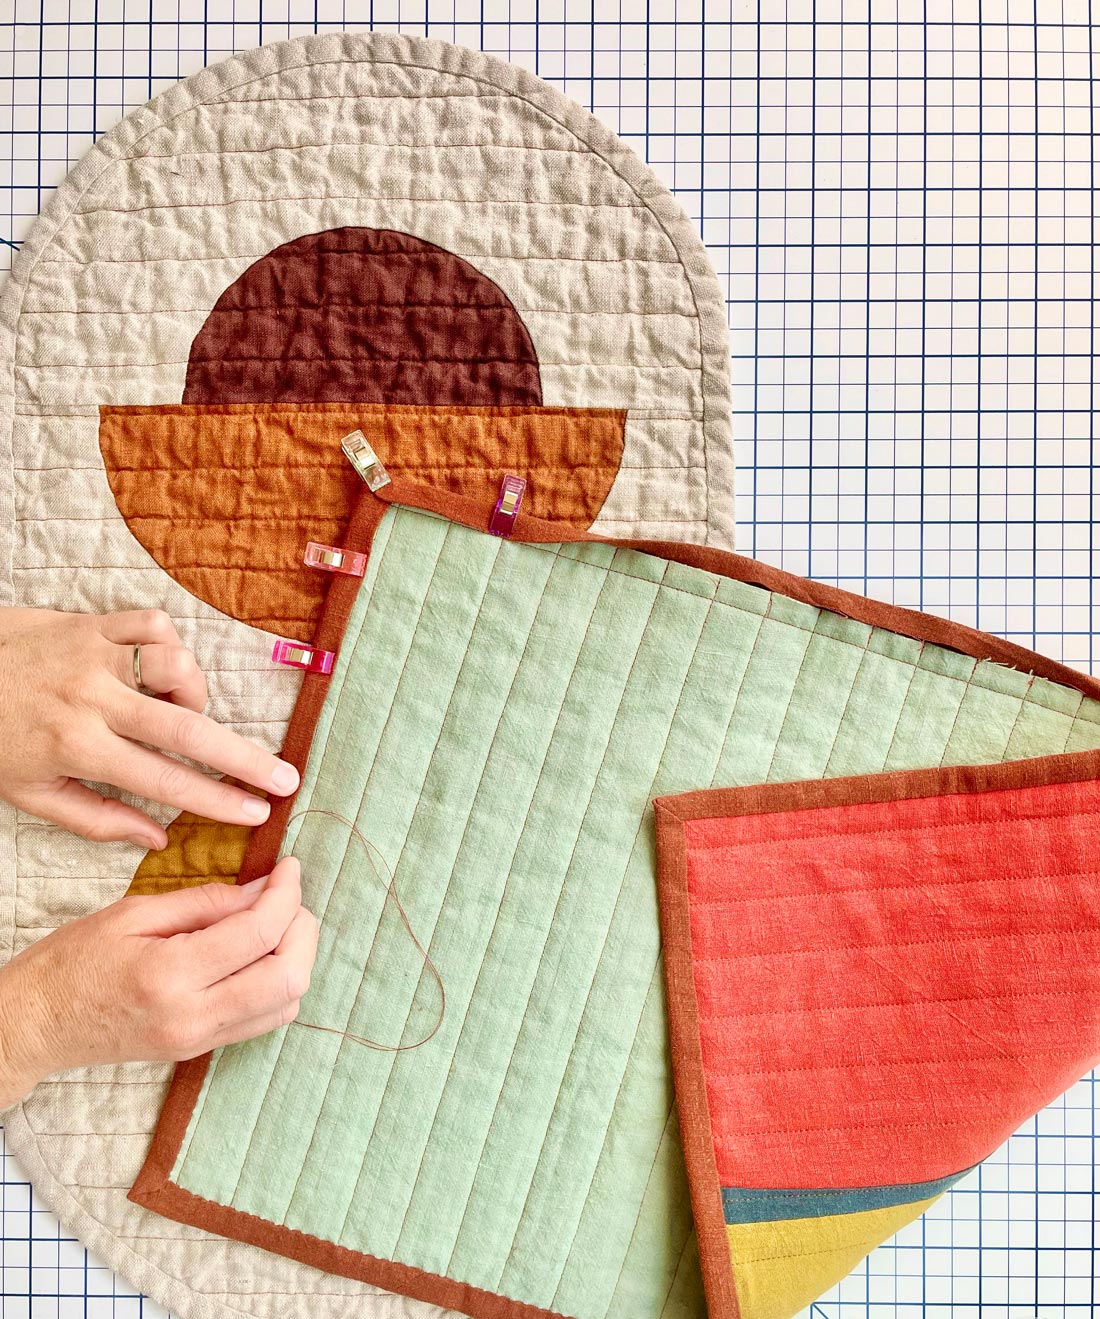 A hand-sewn quilt in the process of being made.